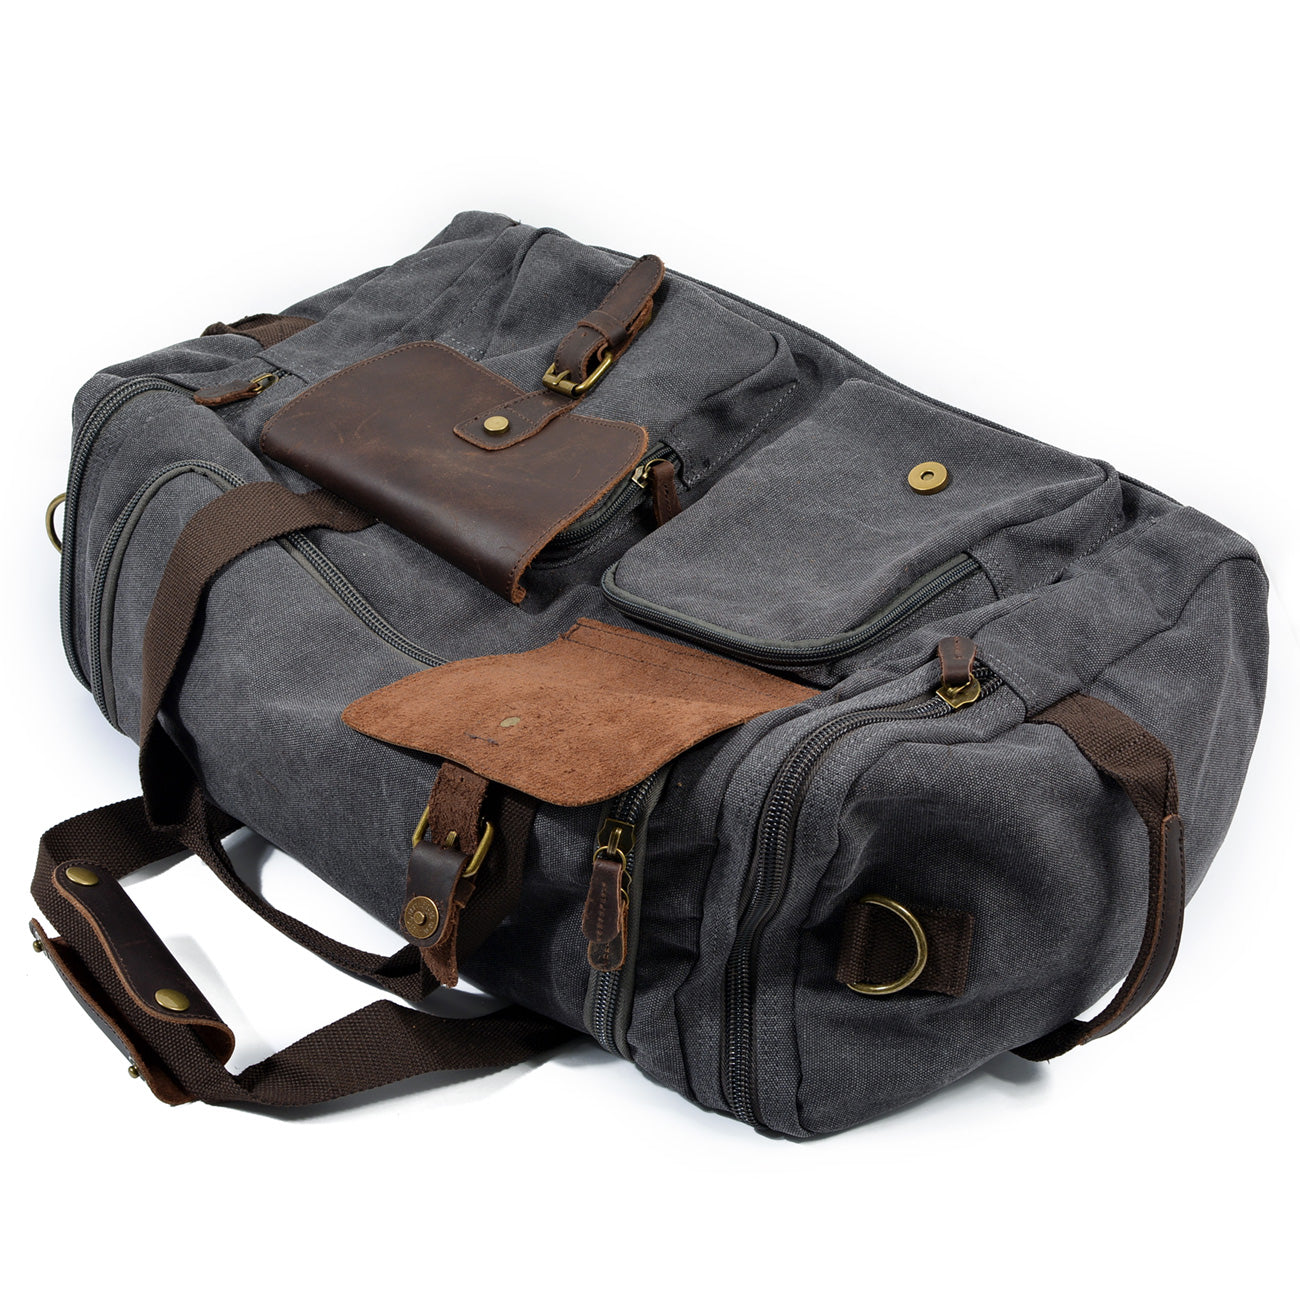 expandable men's Weekend overnight duffle Bag with detachable shoulder strap with polyester liner and sturdy stitching and seams